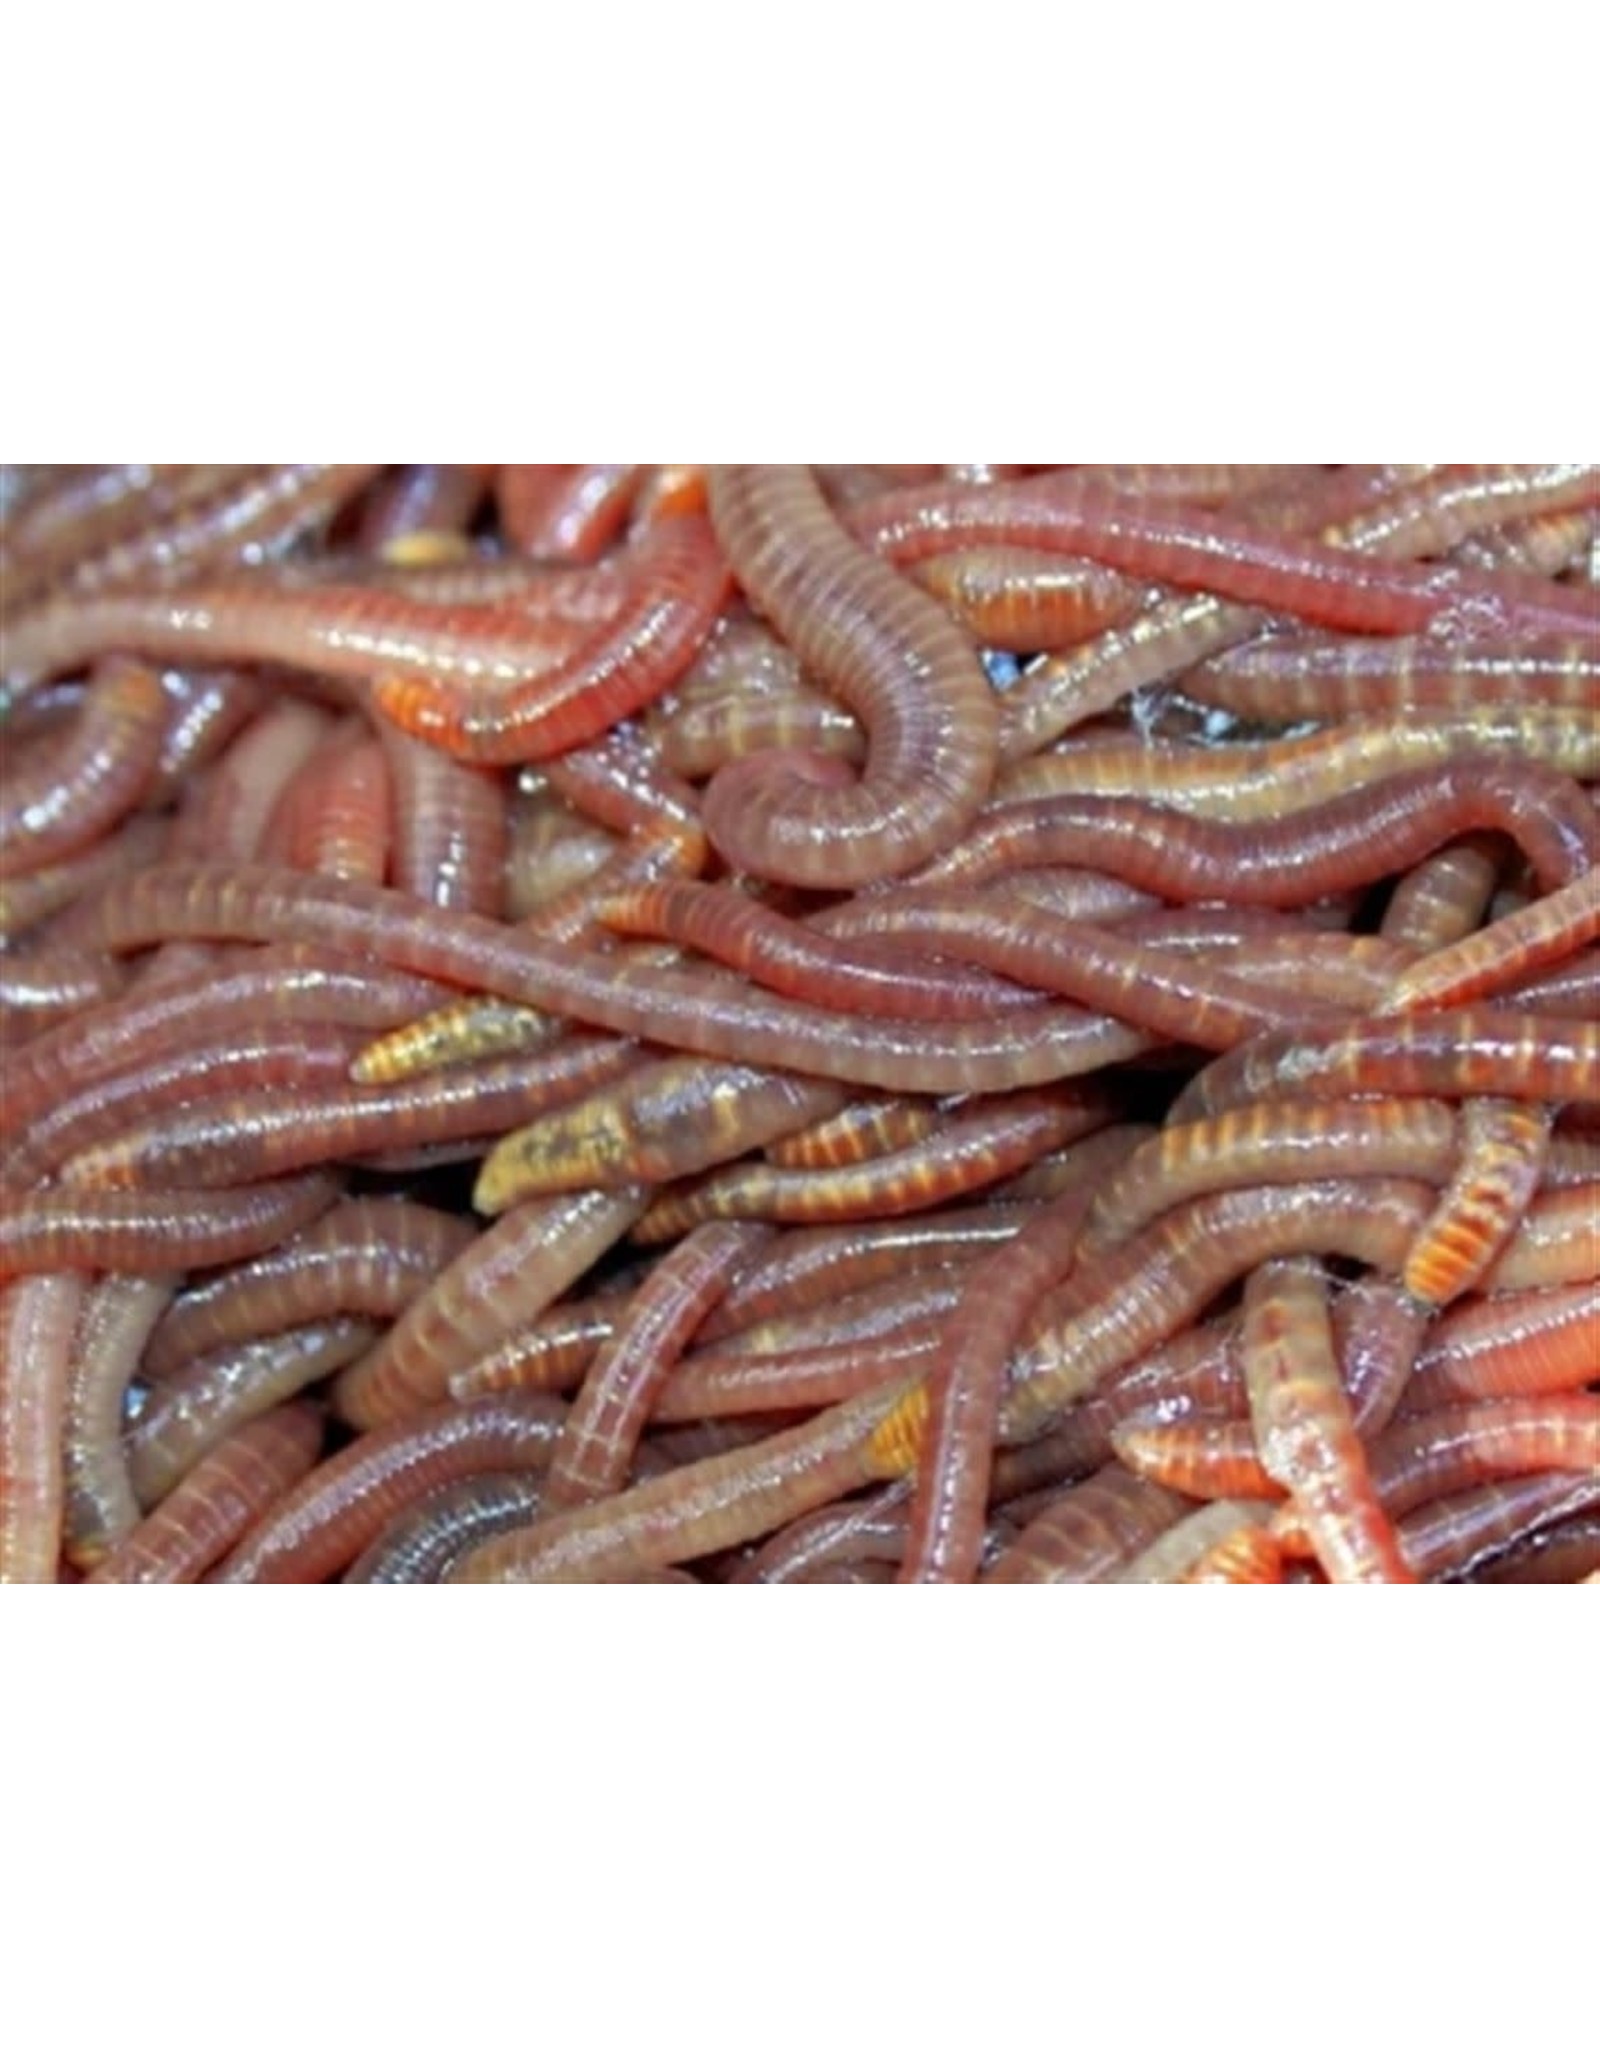 Live Worms 18PK